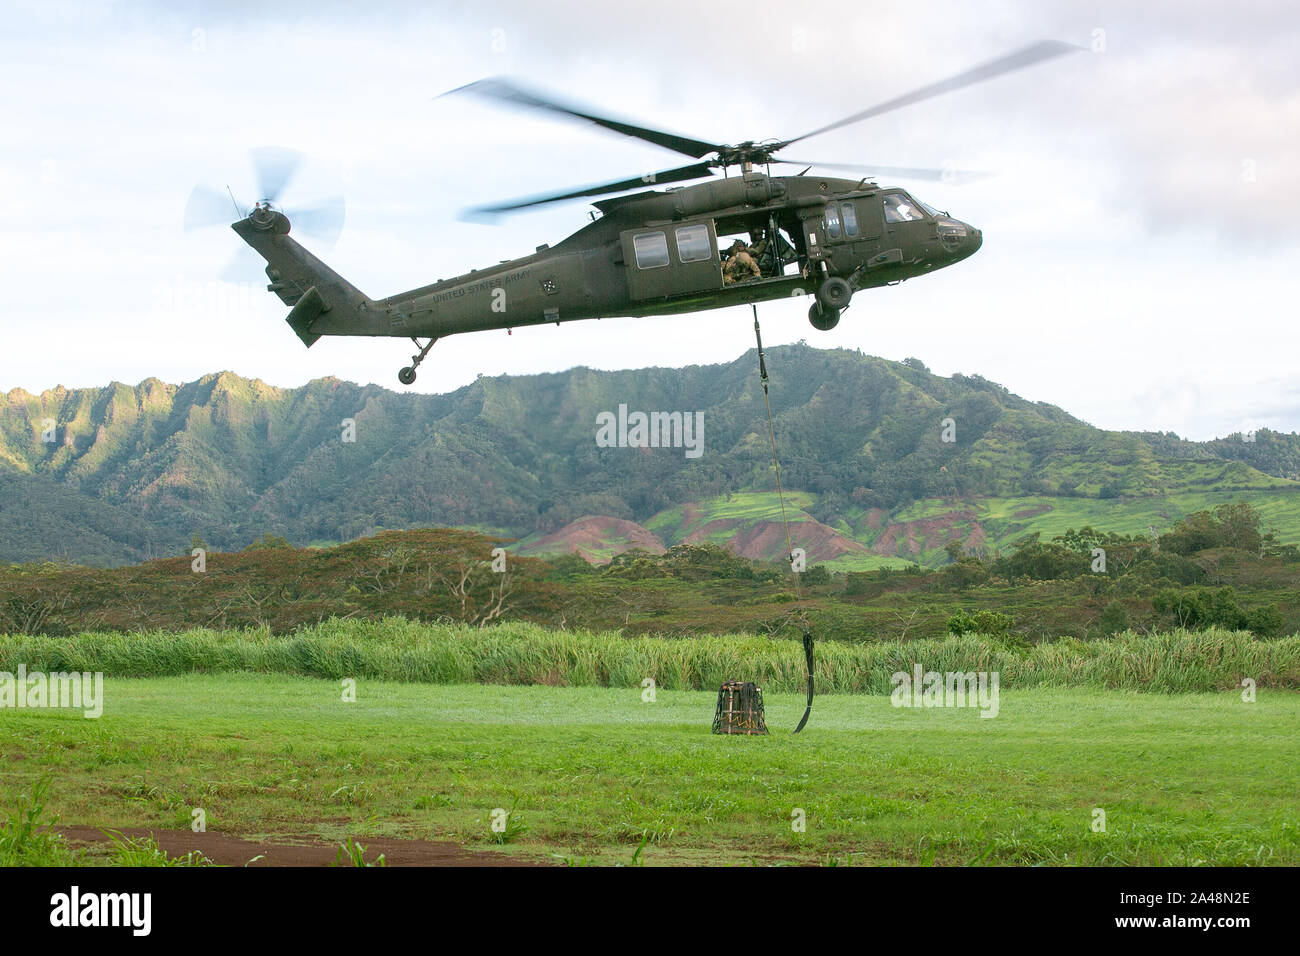 U.S. Army UH-60 Black Hawk helicopter assigned to 2nd Battalion, 25th Aviation Regiment sling loads 155mm rounds before a live-fire air assault artillery raid on Schofield Barracks, Hawaii, October 10, 2019. The 25th Combat Aviation Brigade worked alongside Charlie Battery, 2nd Battalion, 11th Field Artillery Regiment on the first live-fire air assault of M777 Howitzers ever conducted on the island of Oahu. (U.S. Army photo by 1st Lt. Ryan DeBooy) Stock Photo